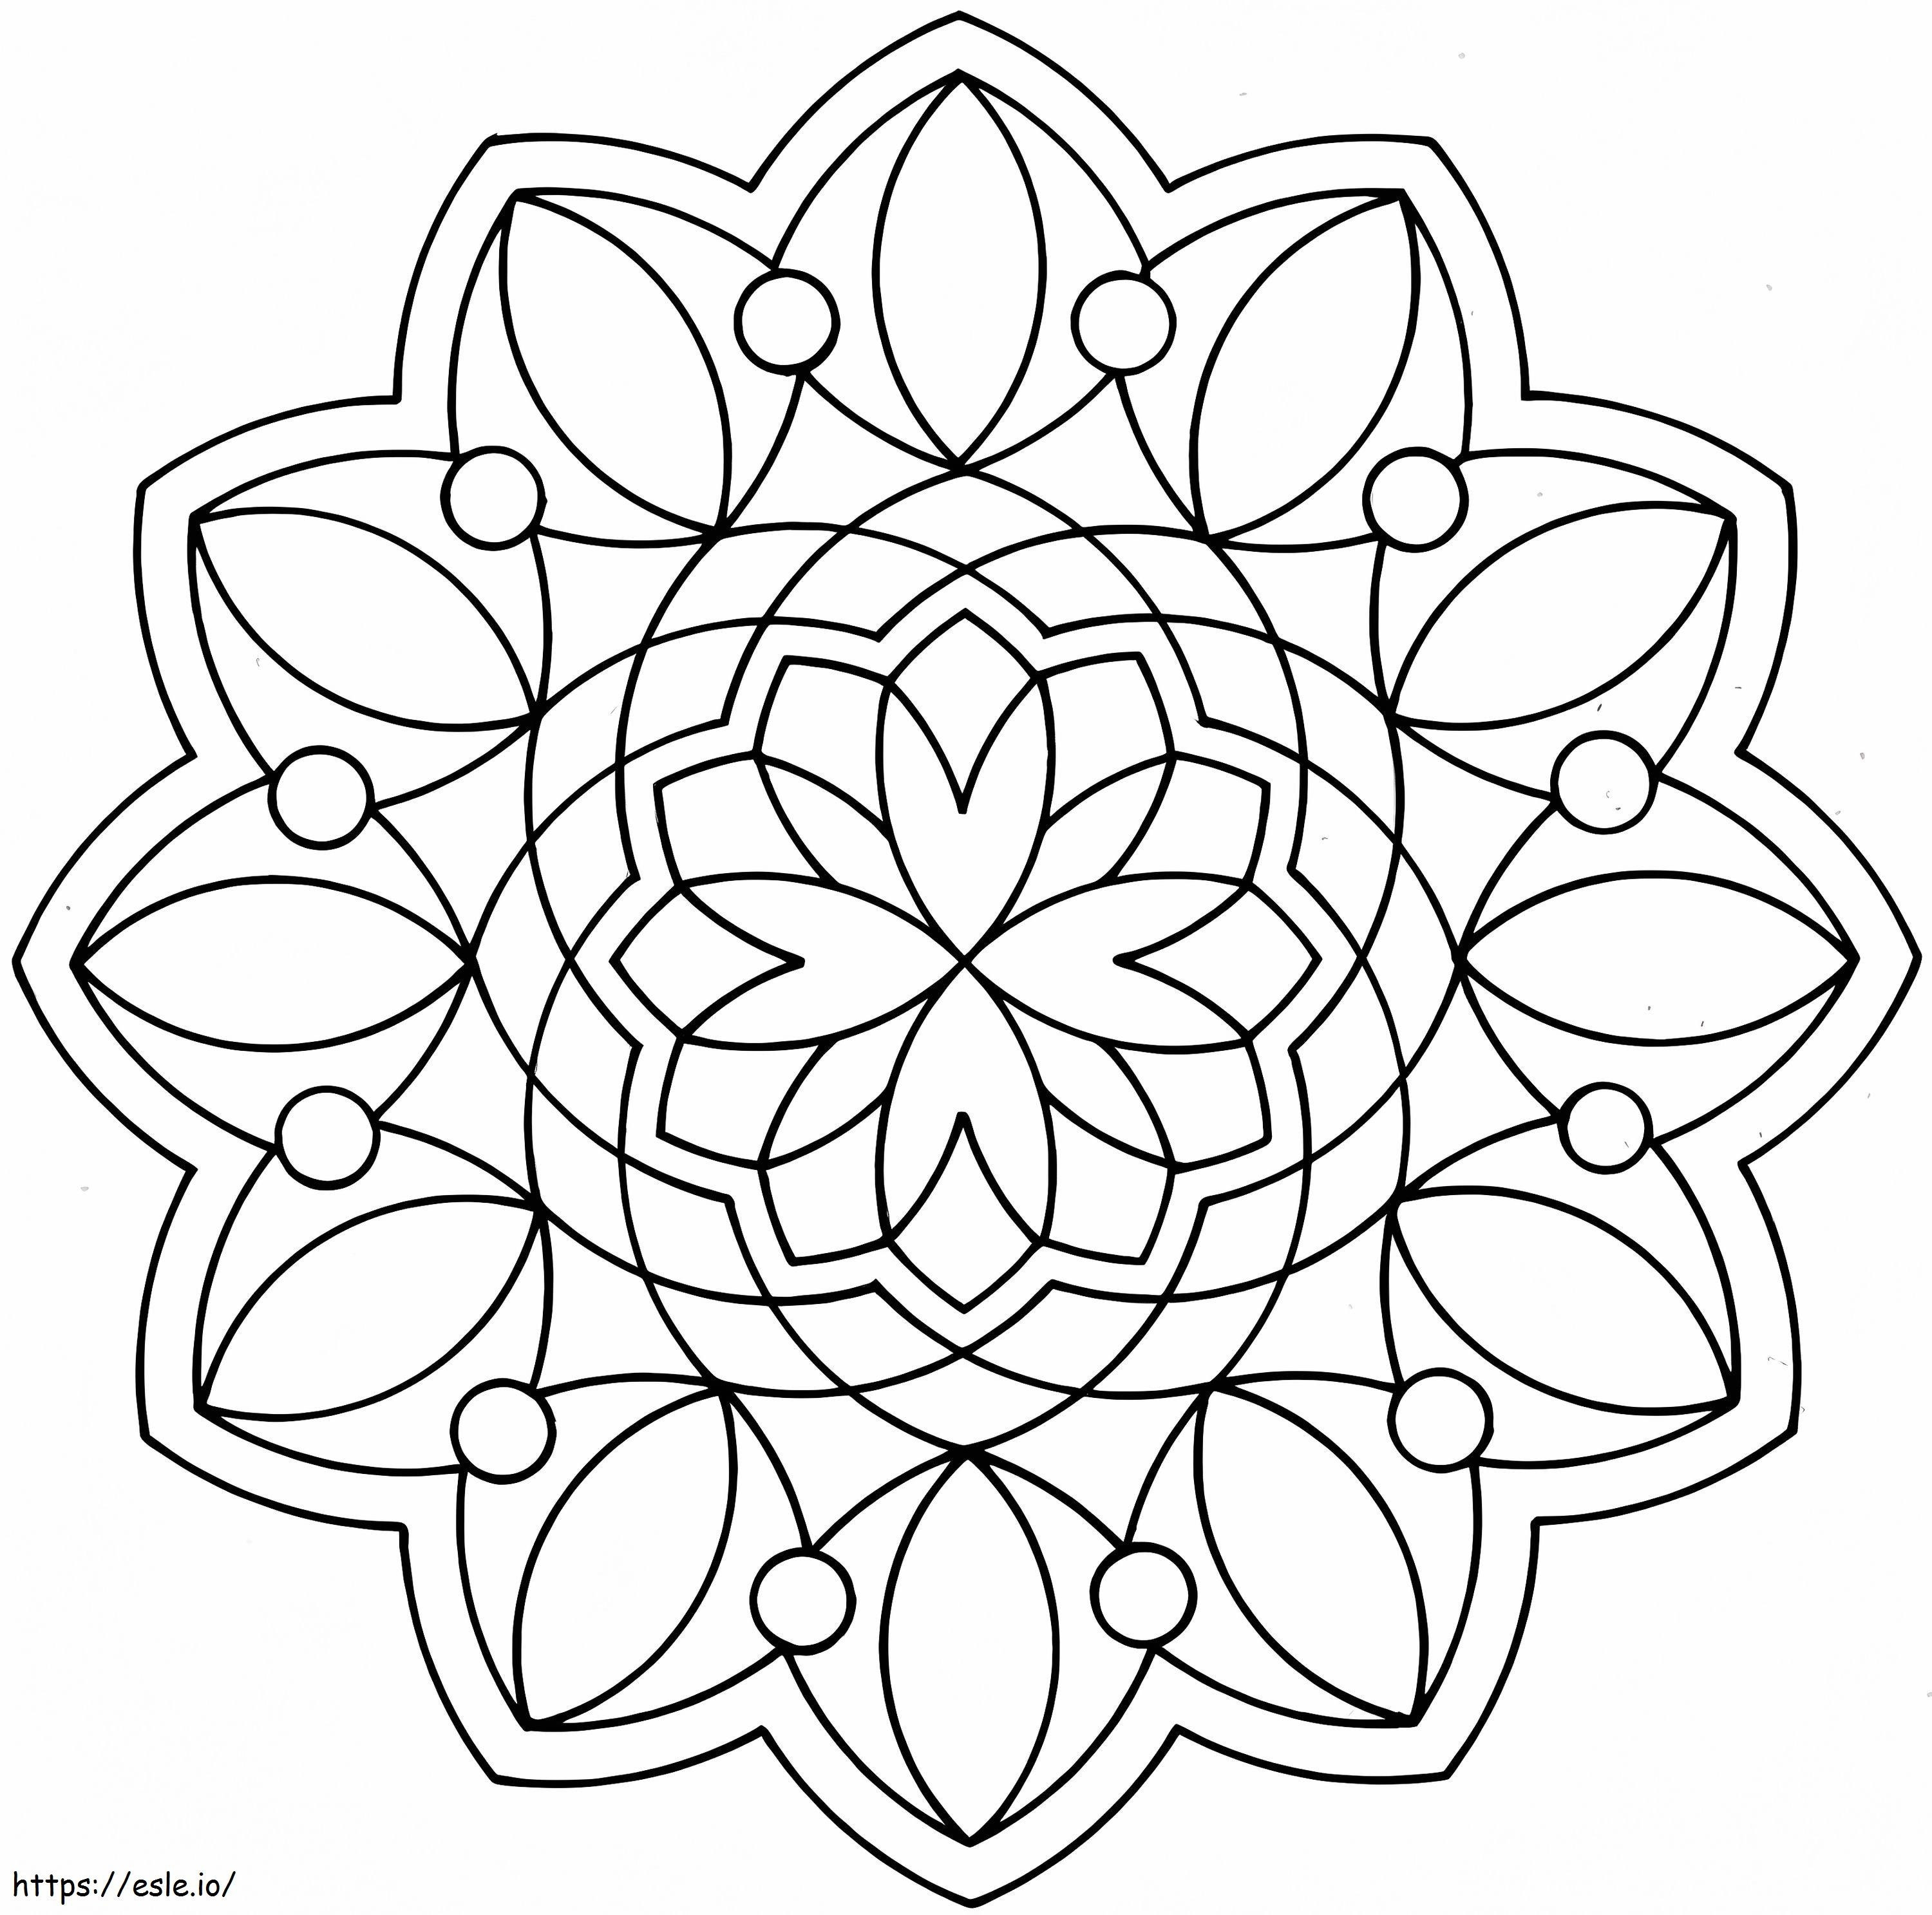 Flower Mandala To Color coloring page